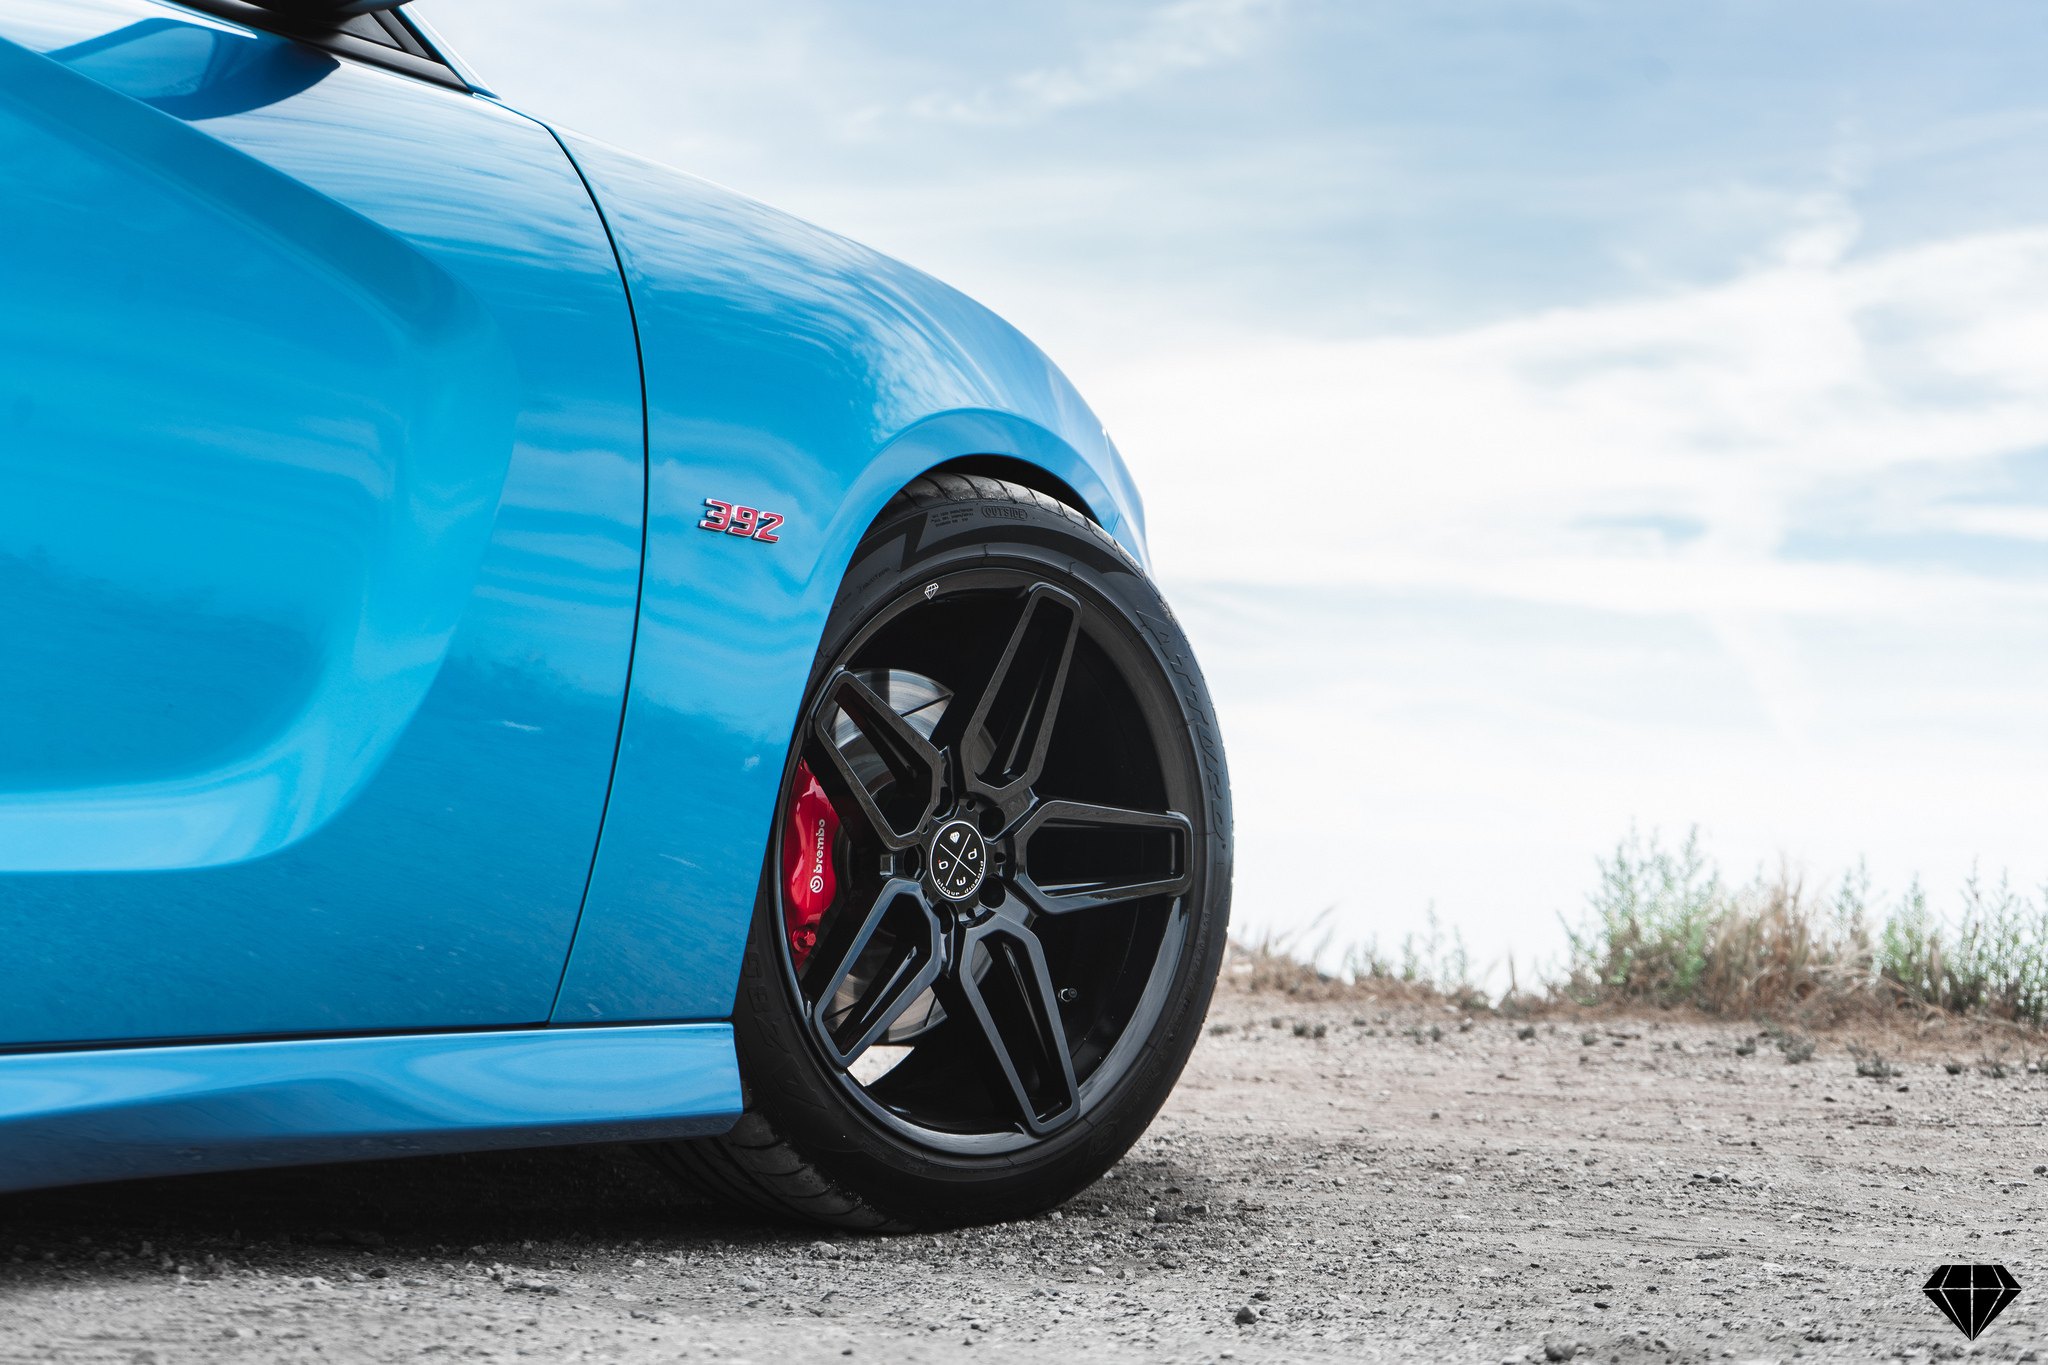 Blaque Diamond Rims with Brembo Brakes on Blue Dodge Charger - Photo by Blaque Diamond Wheels